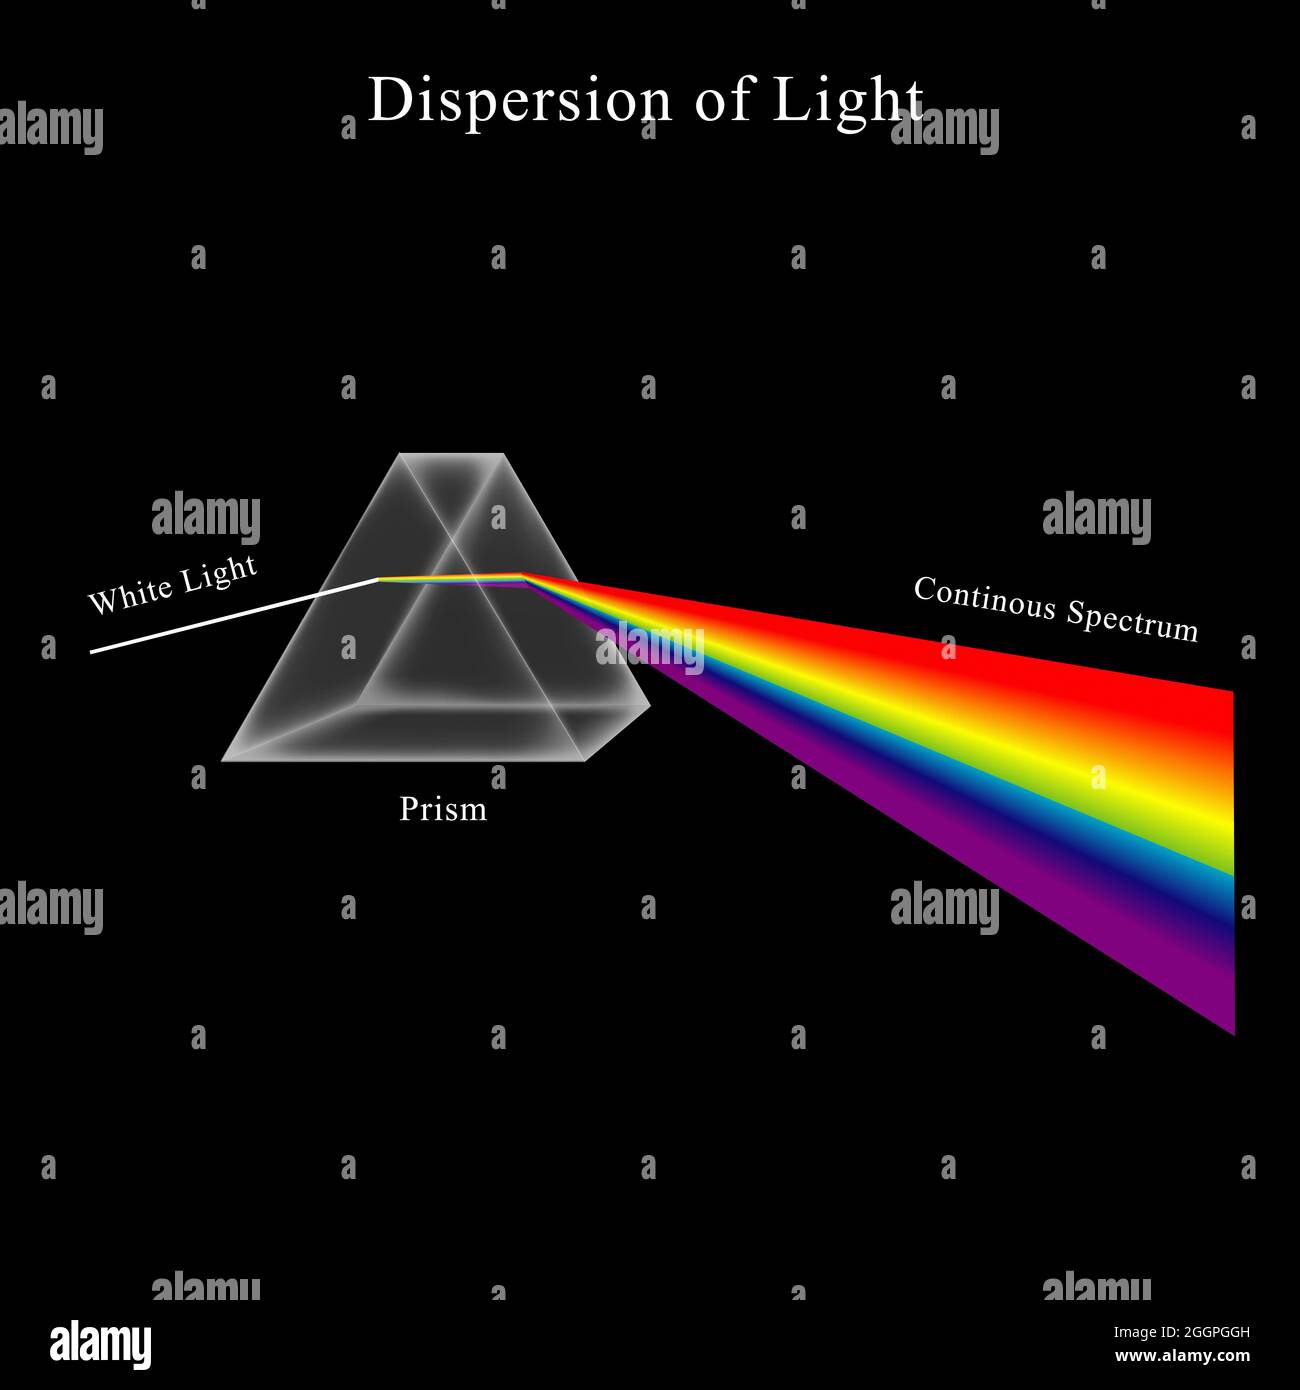 Dispersion of Visible Light Going through Glass Prism Stock Photo - Alamy